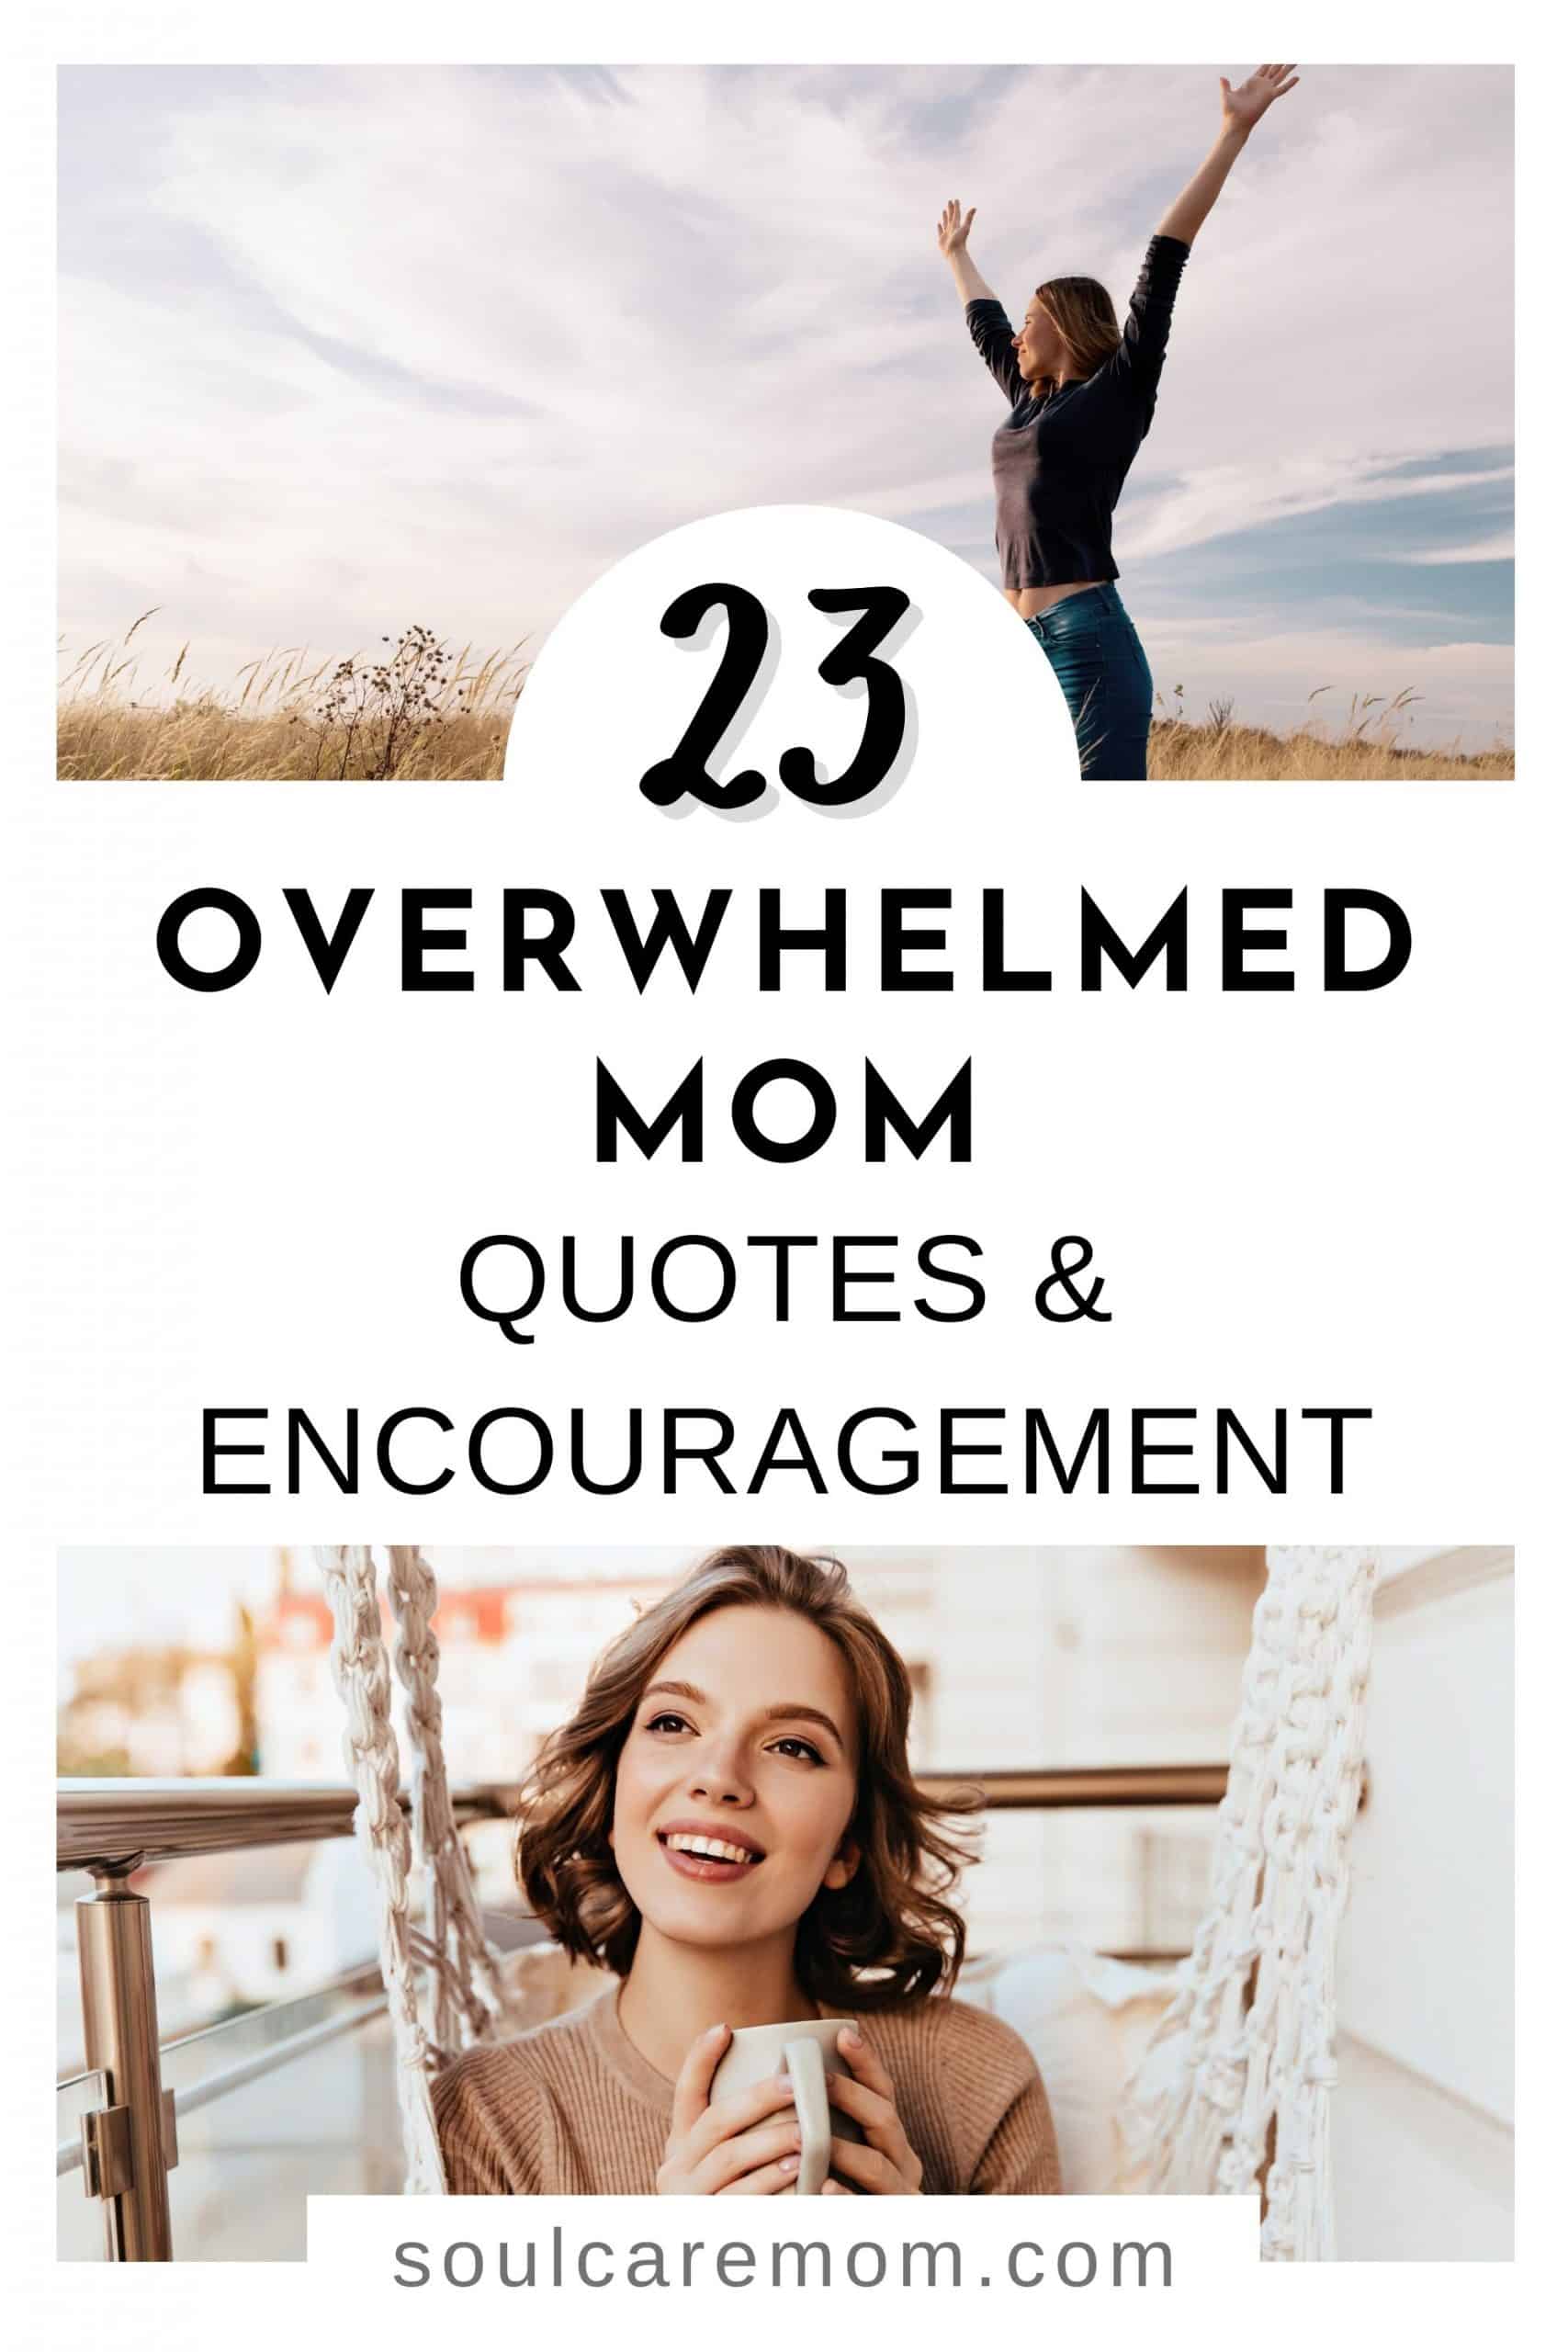 23 overwhelmed mom quotes encouragement life - Pin Image